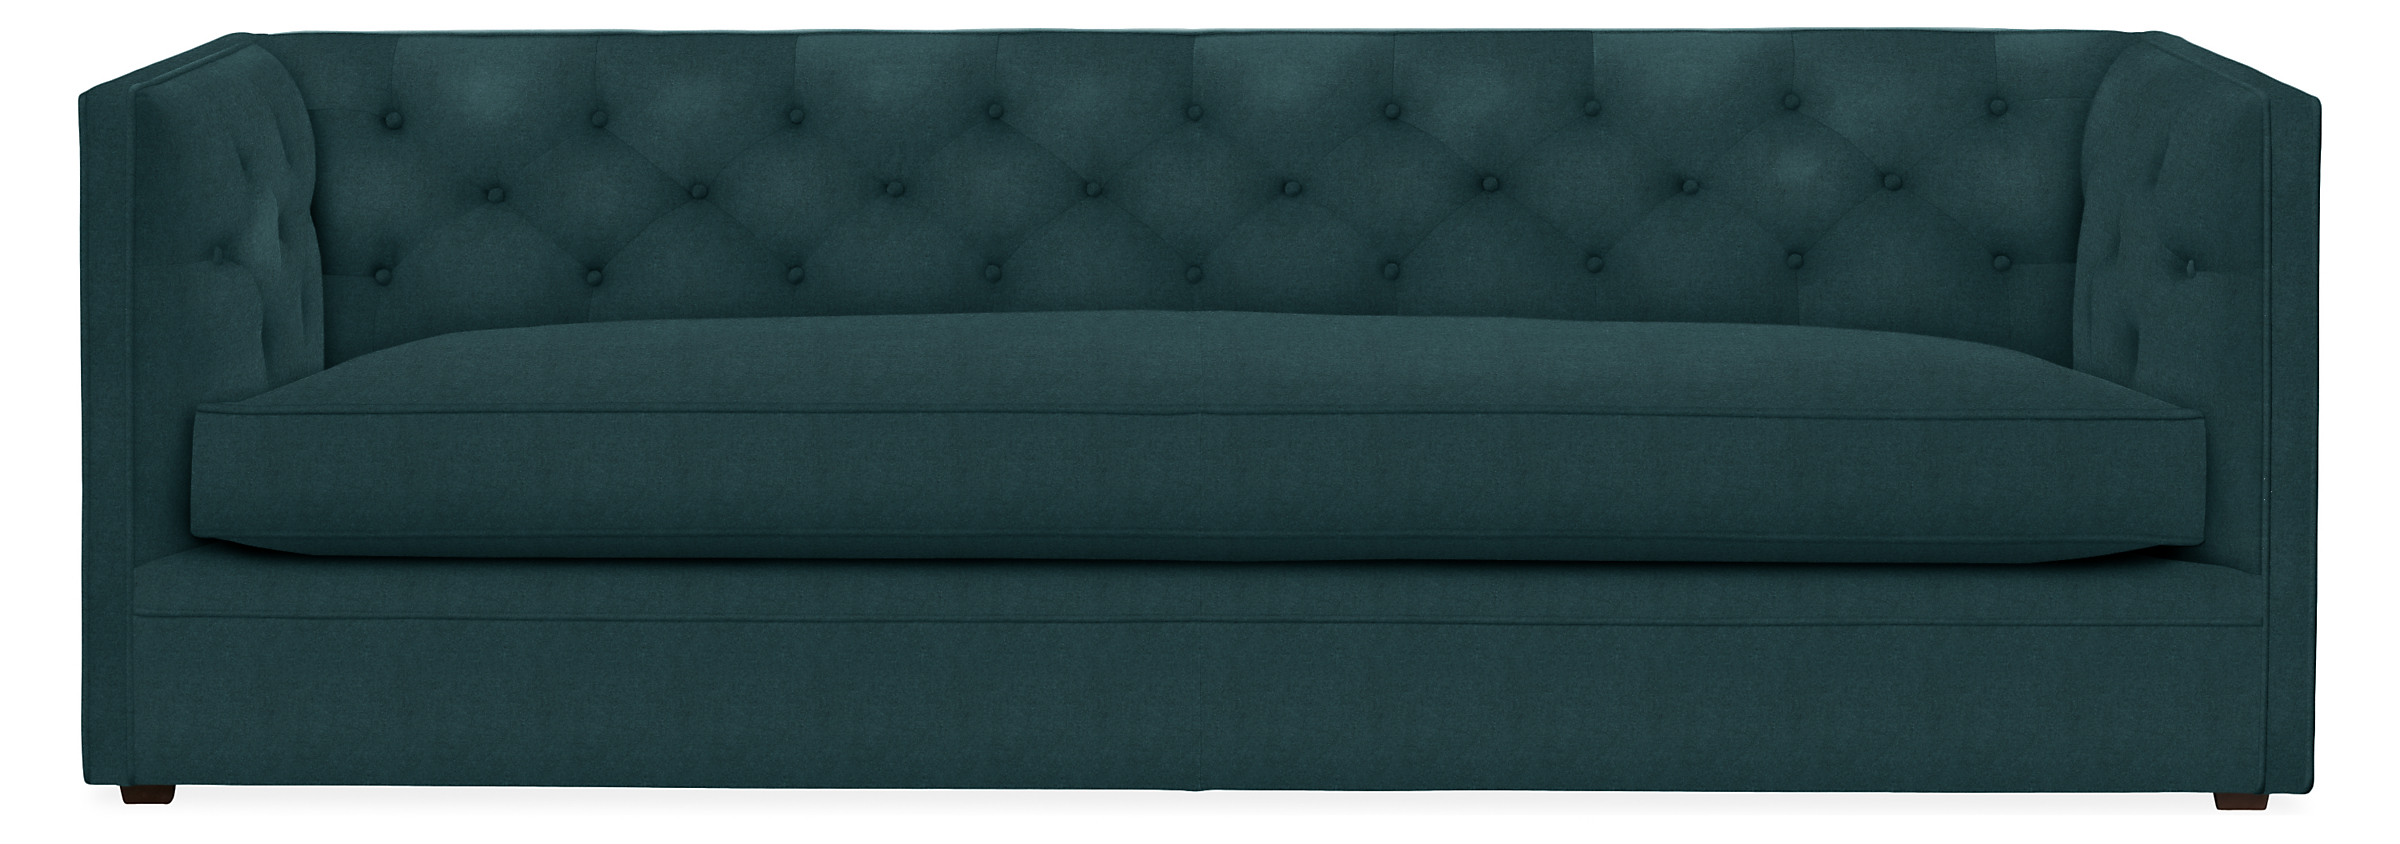 Macalester Sofas